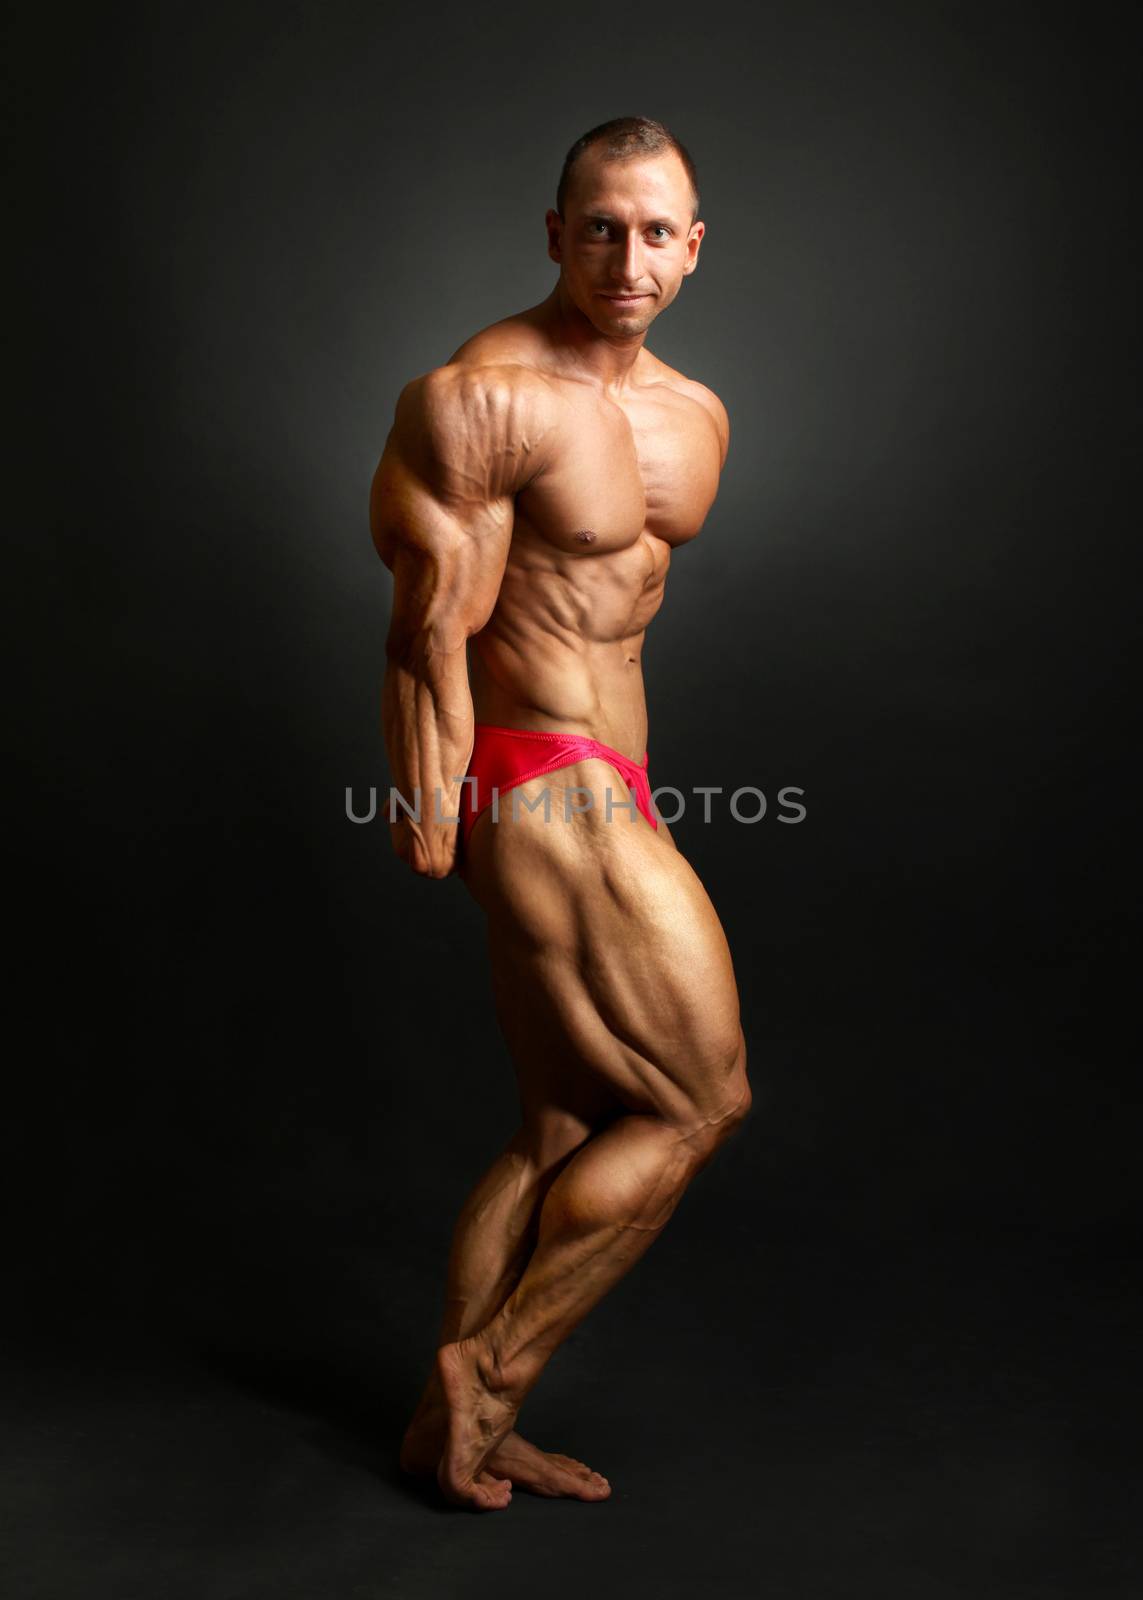 Studio shot of male bodybuilder posing, showing front muscles, h by Ivanko